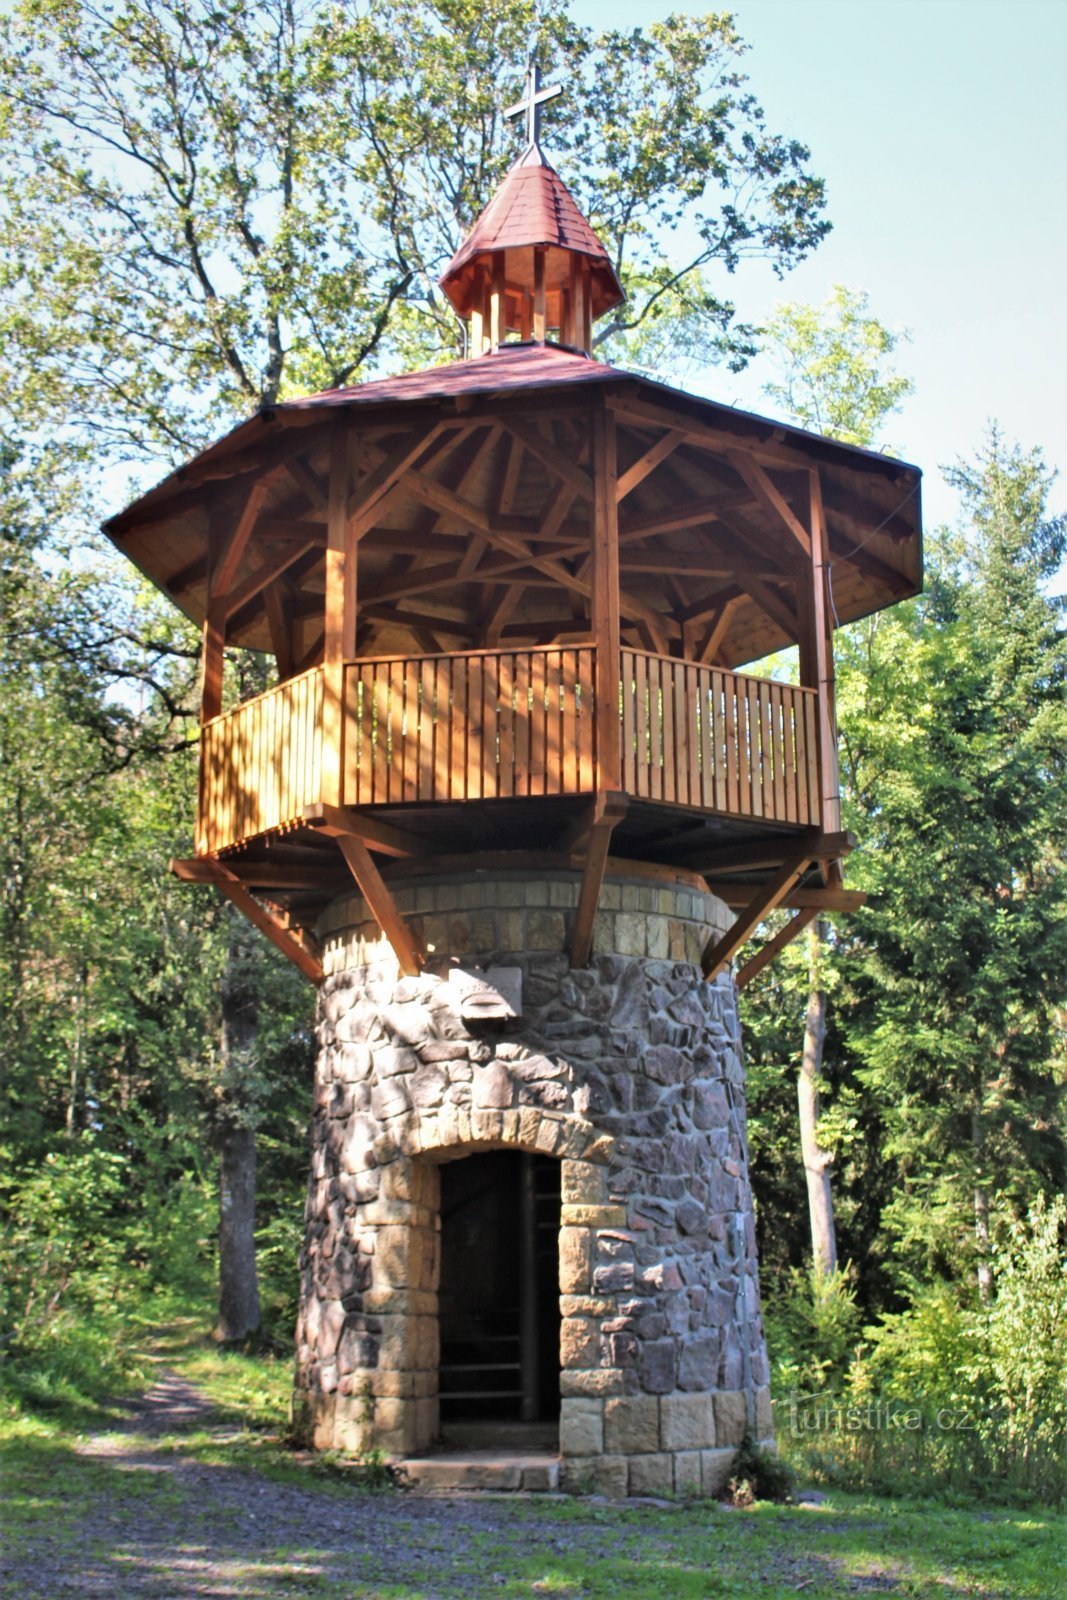 Tourist crossroads Top of the slope - Hláska lookout tower